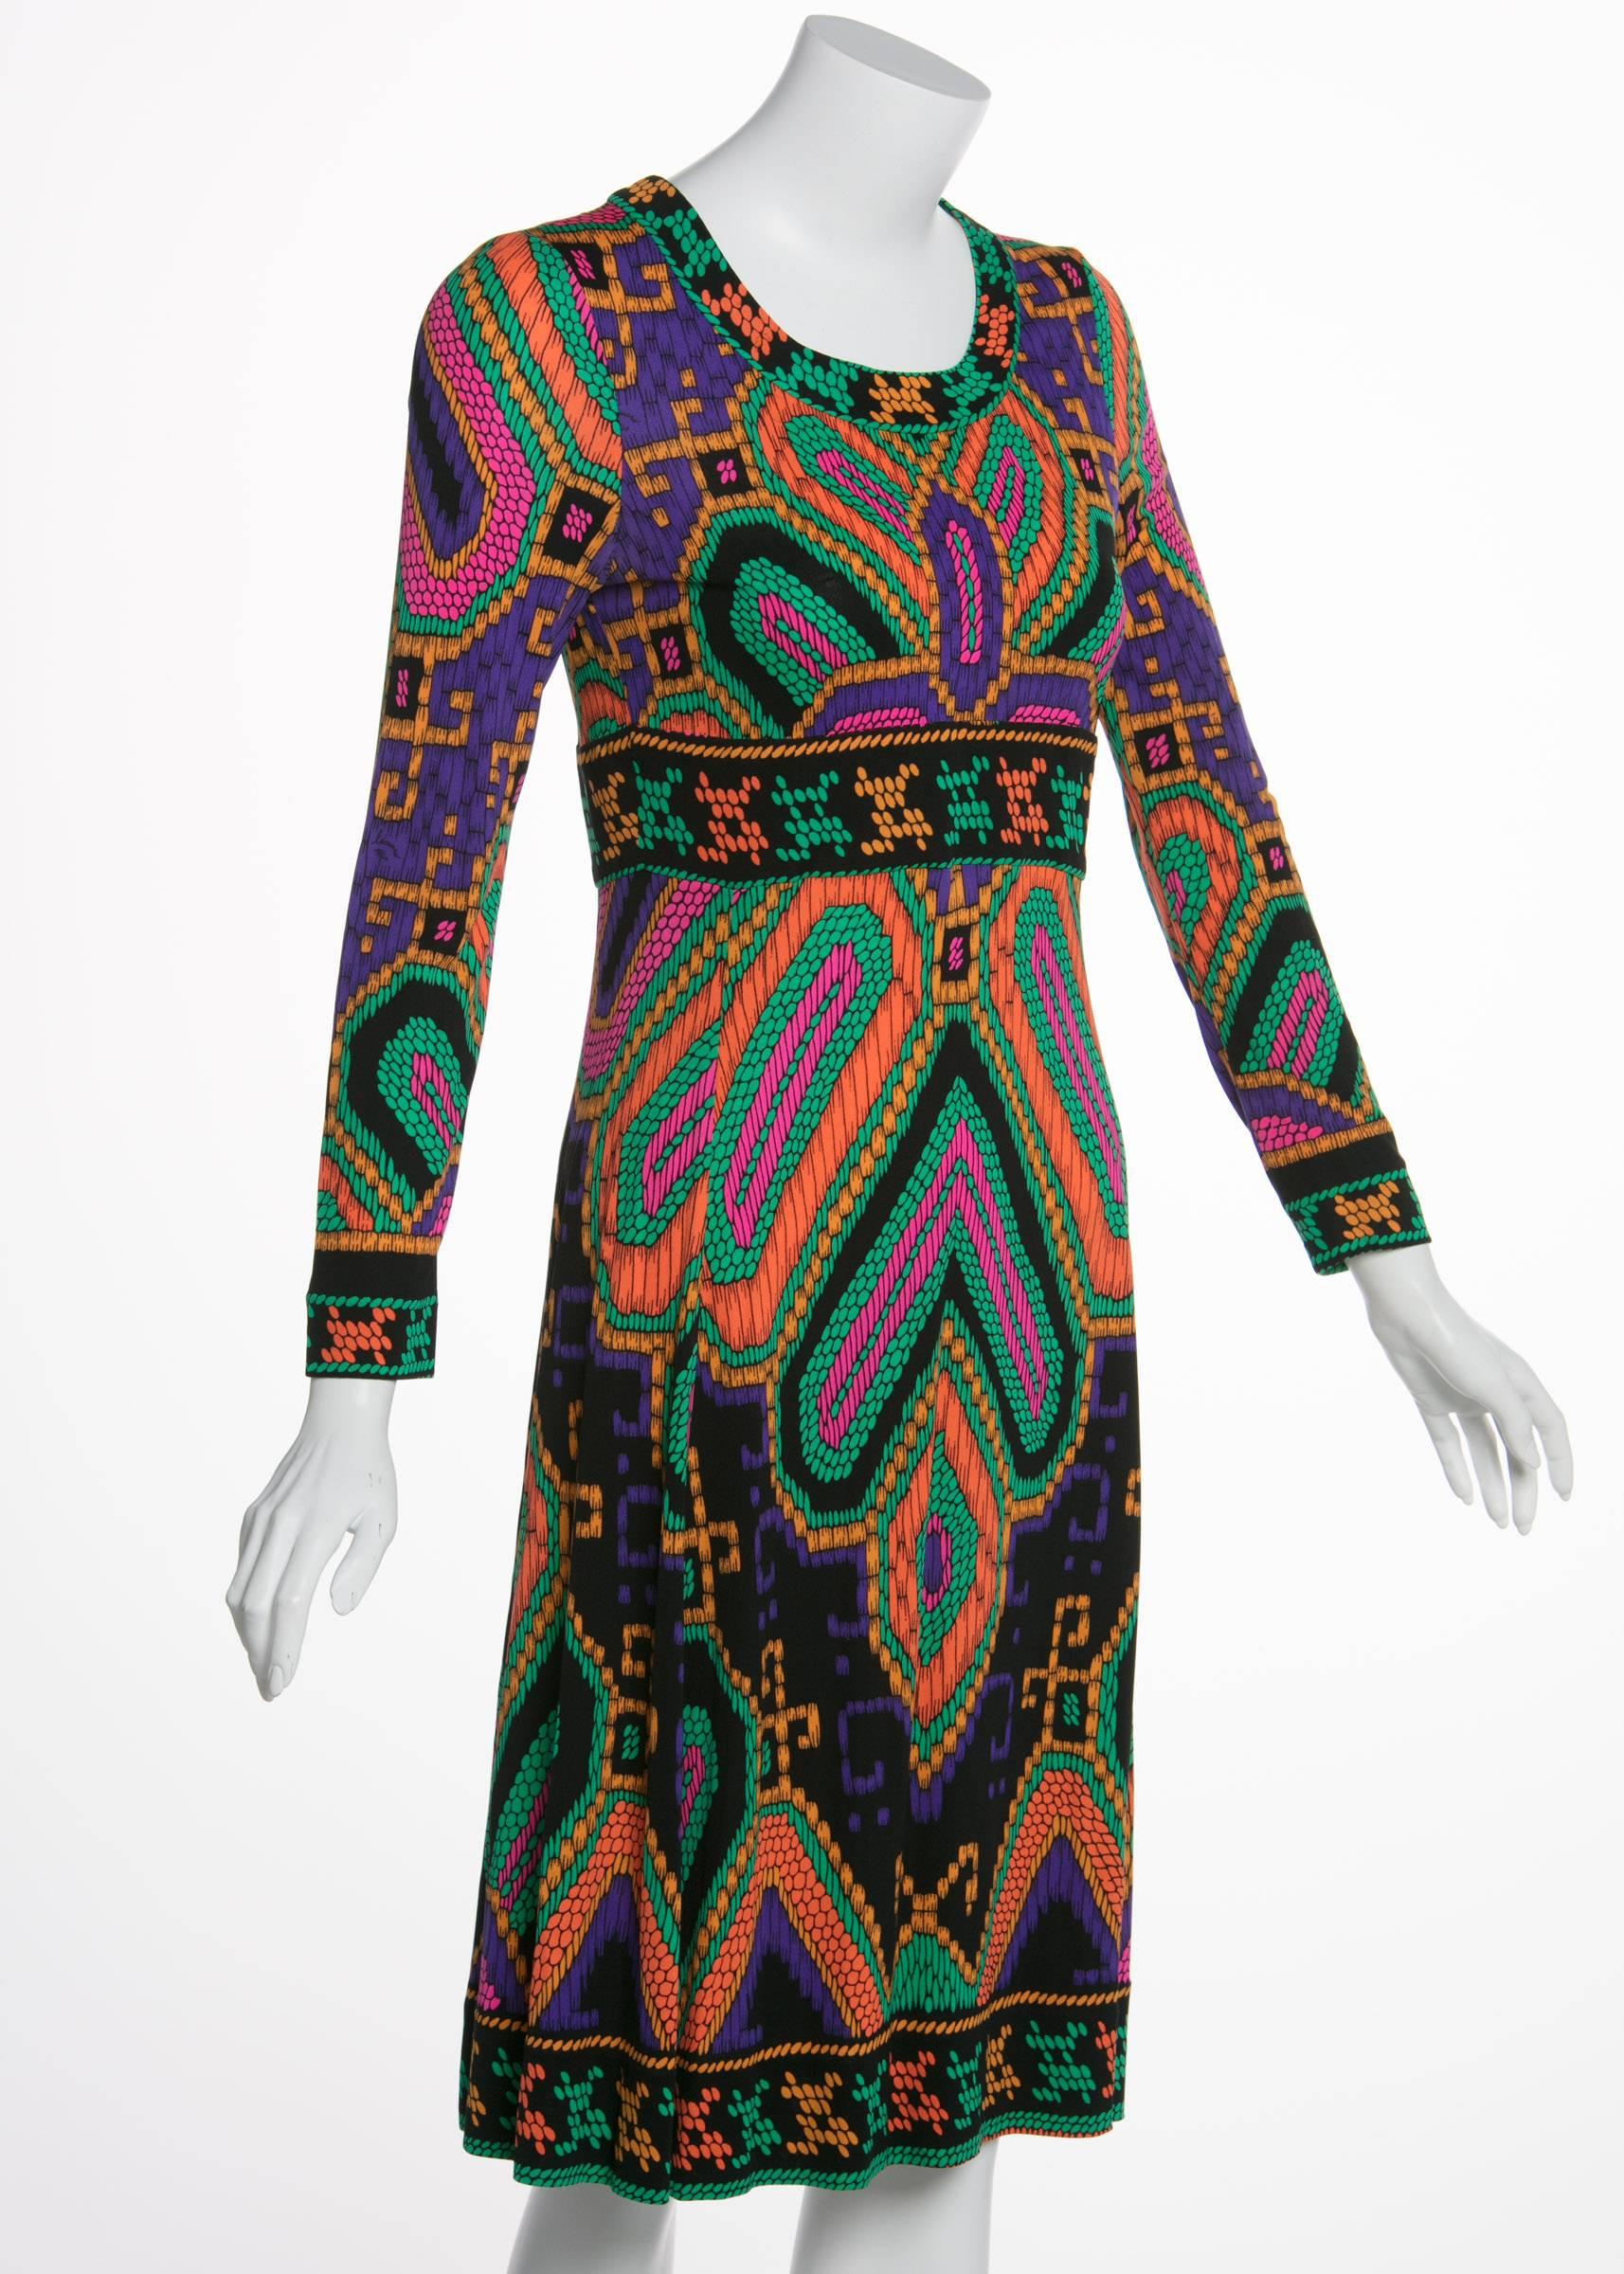 Leonard Paris Silk Jersey Print Dress Documented 1970s  In Excellent Condition For Sale In Boca Raton, FL